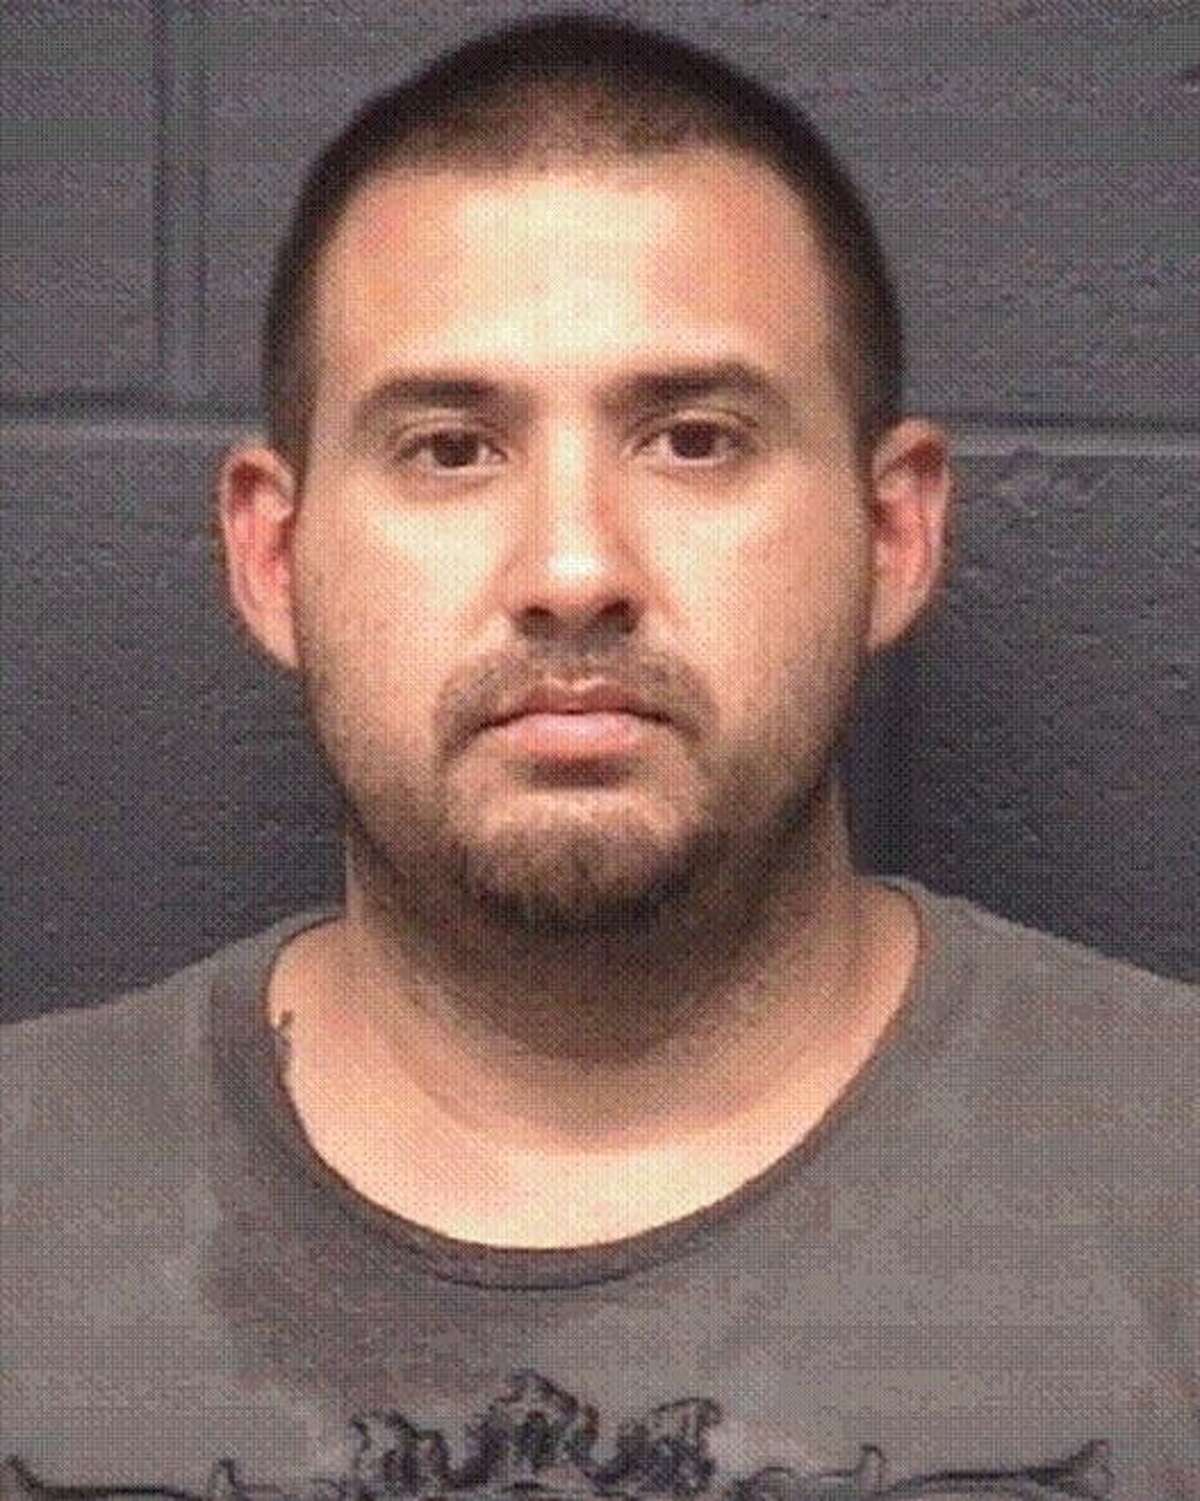 Jaime Saldivar Jr., whose case was scheduled for jury selection Monday, opted to plead guilty to the charges and have a bench trial before 341st District Court Judge Beckie Palomo for his sentencing.